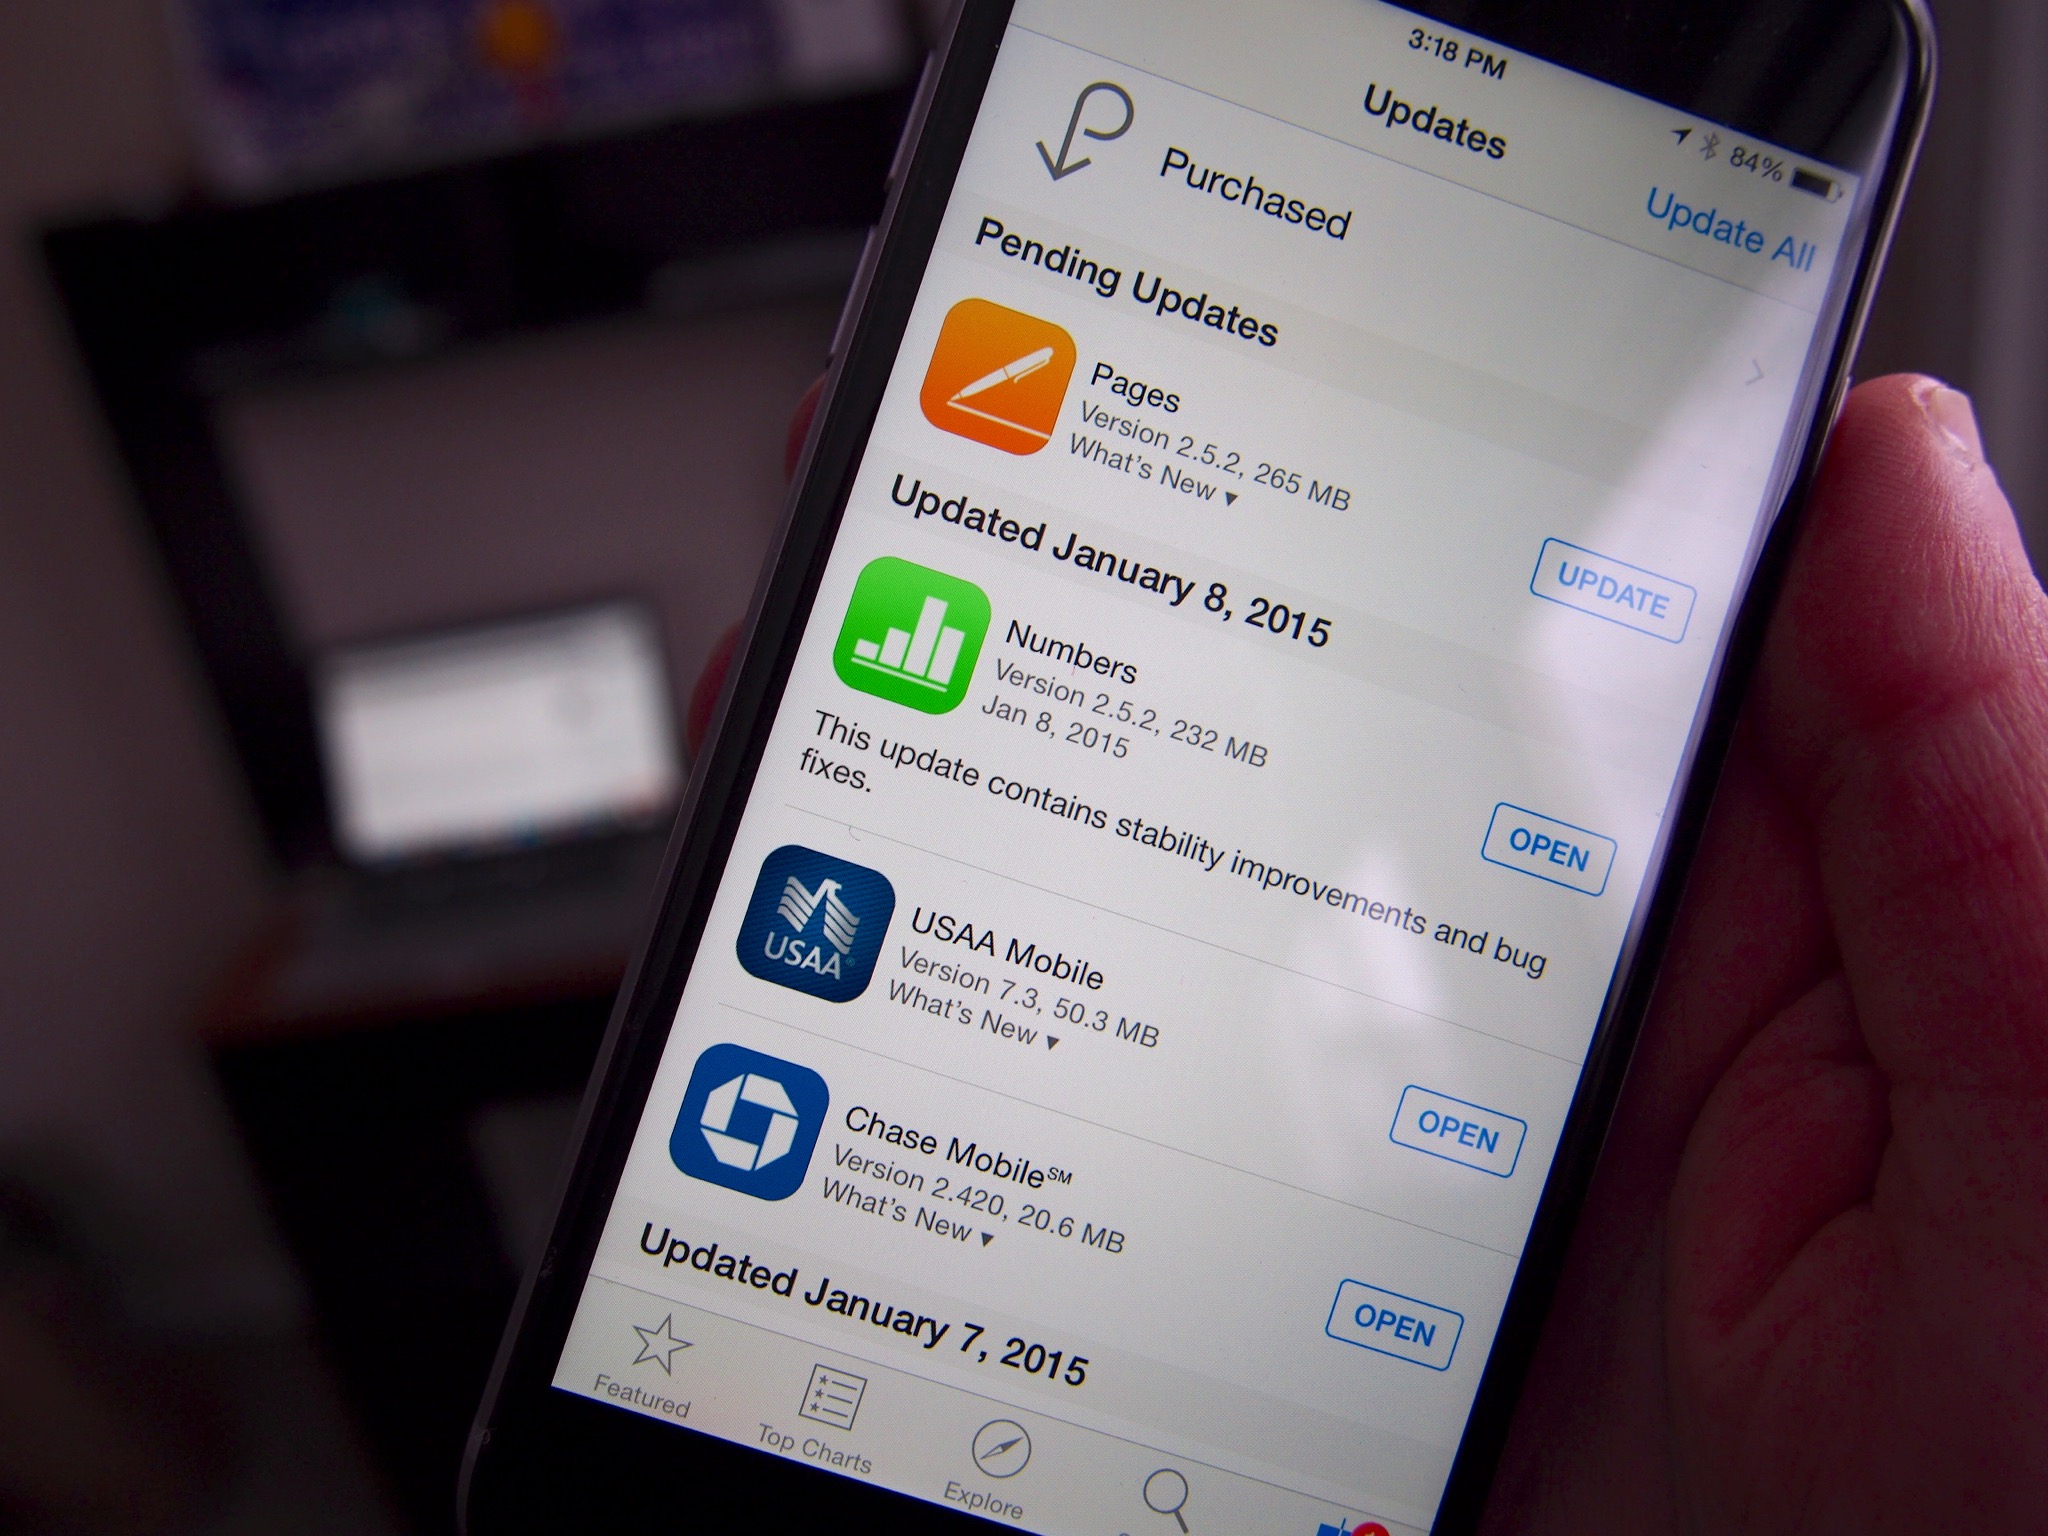 iWork apps for iOS and OS X updated with bug fixes and stability improvements